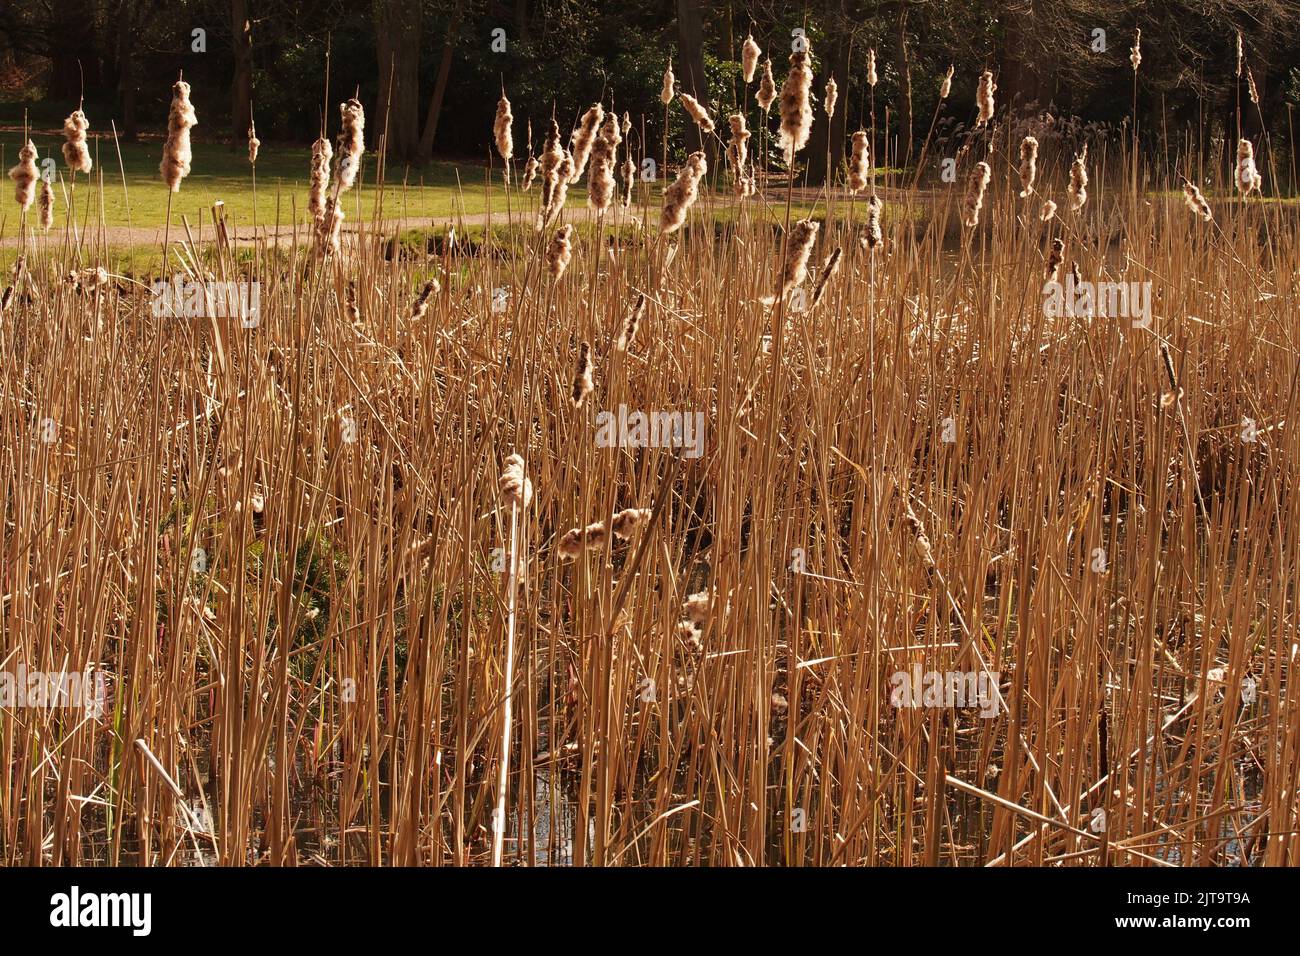 A view of fenland reeds growing round a pond in Brandon Country Park, Suffolk with the sunshine backlighting through the reeds Stock Photo